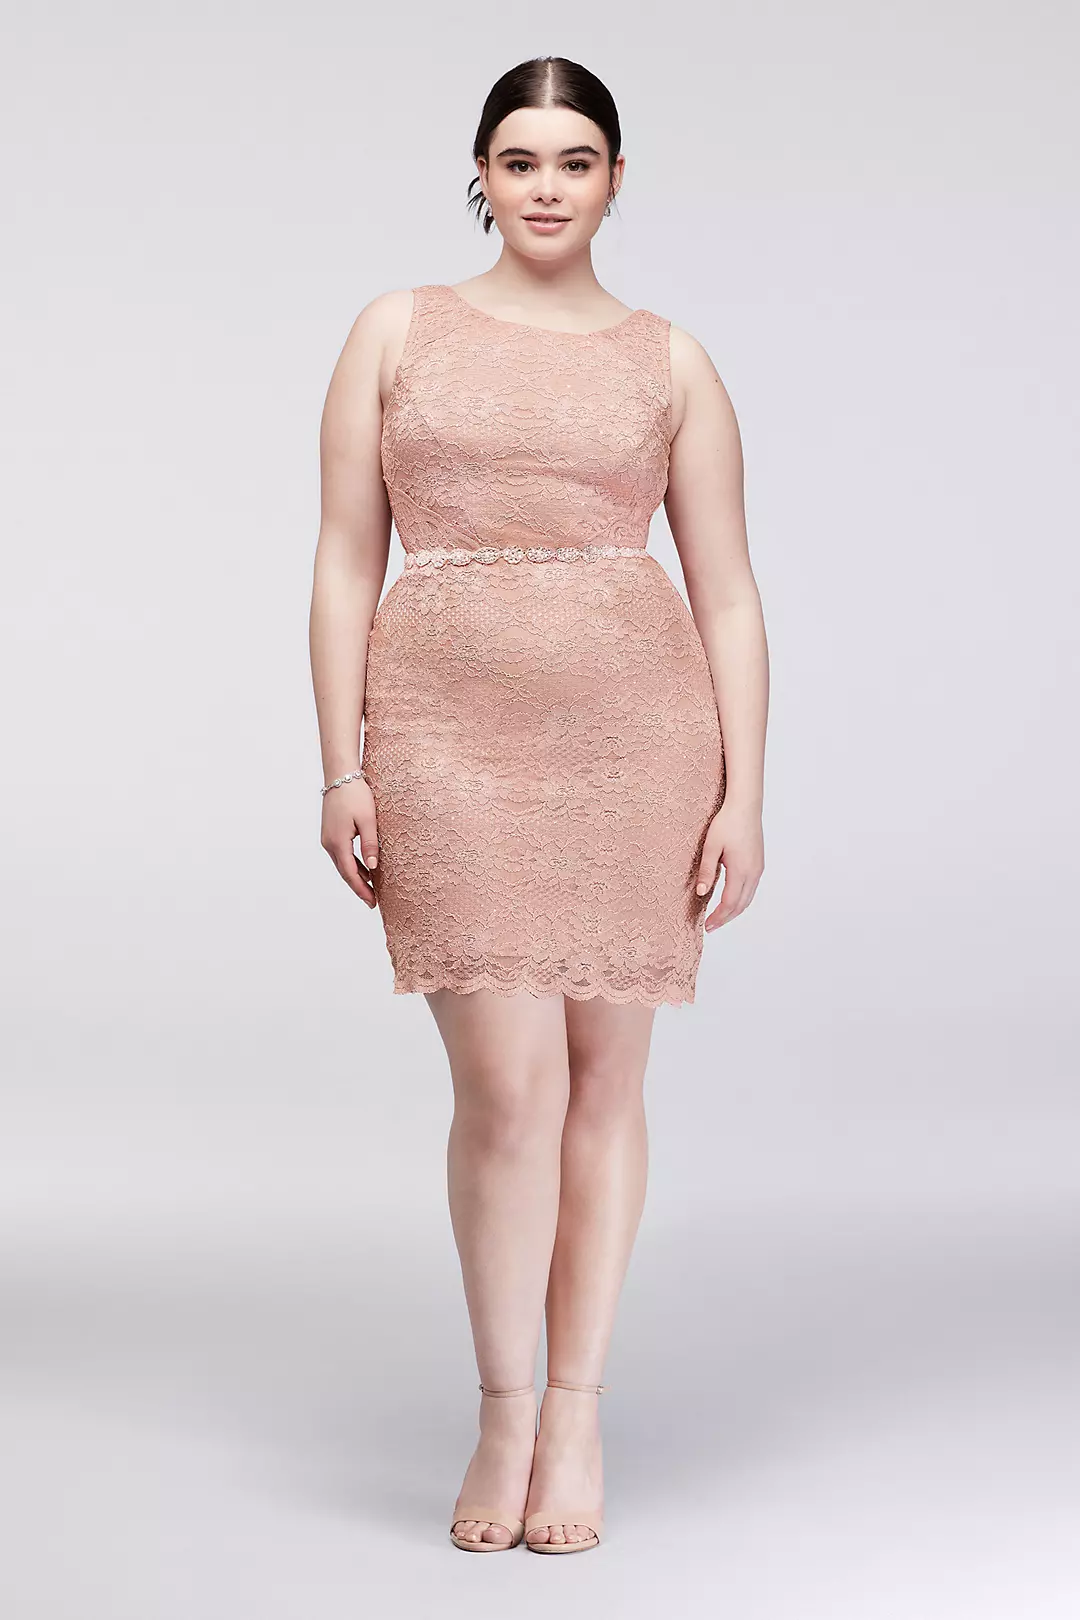 Sleeveless Lace Cocktail Dress with Beaded Waist Image